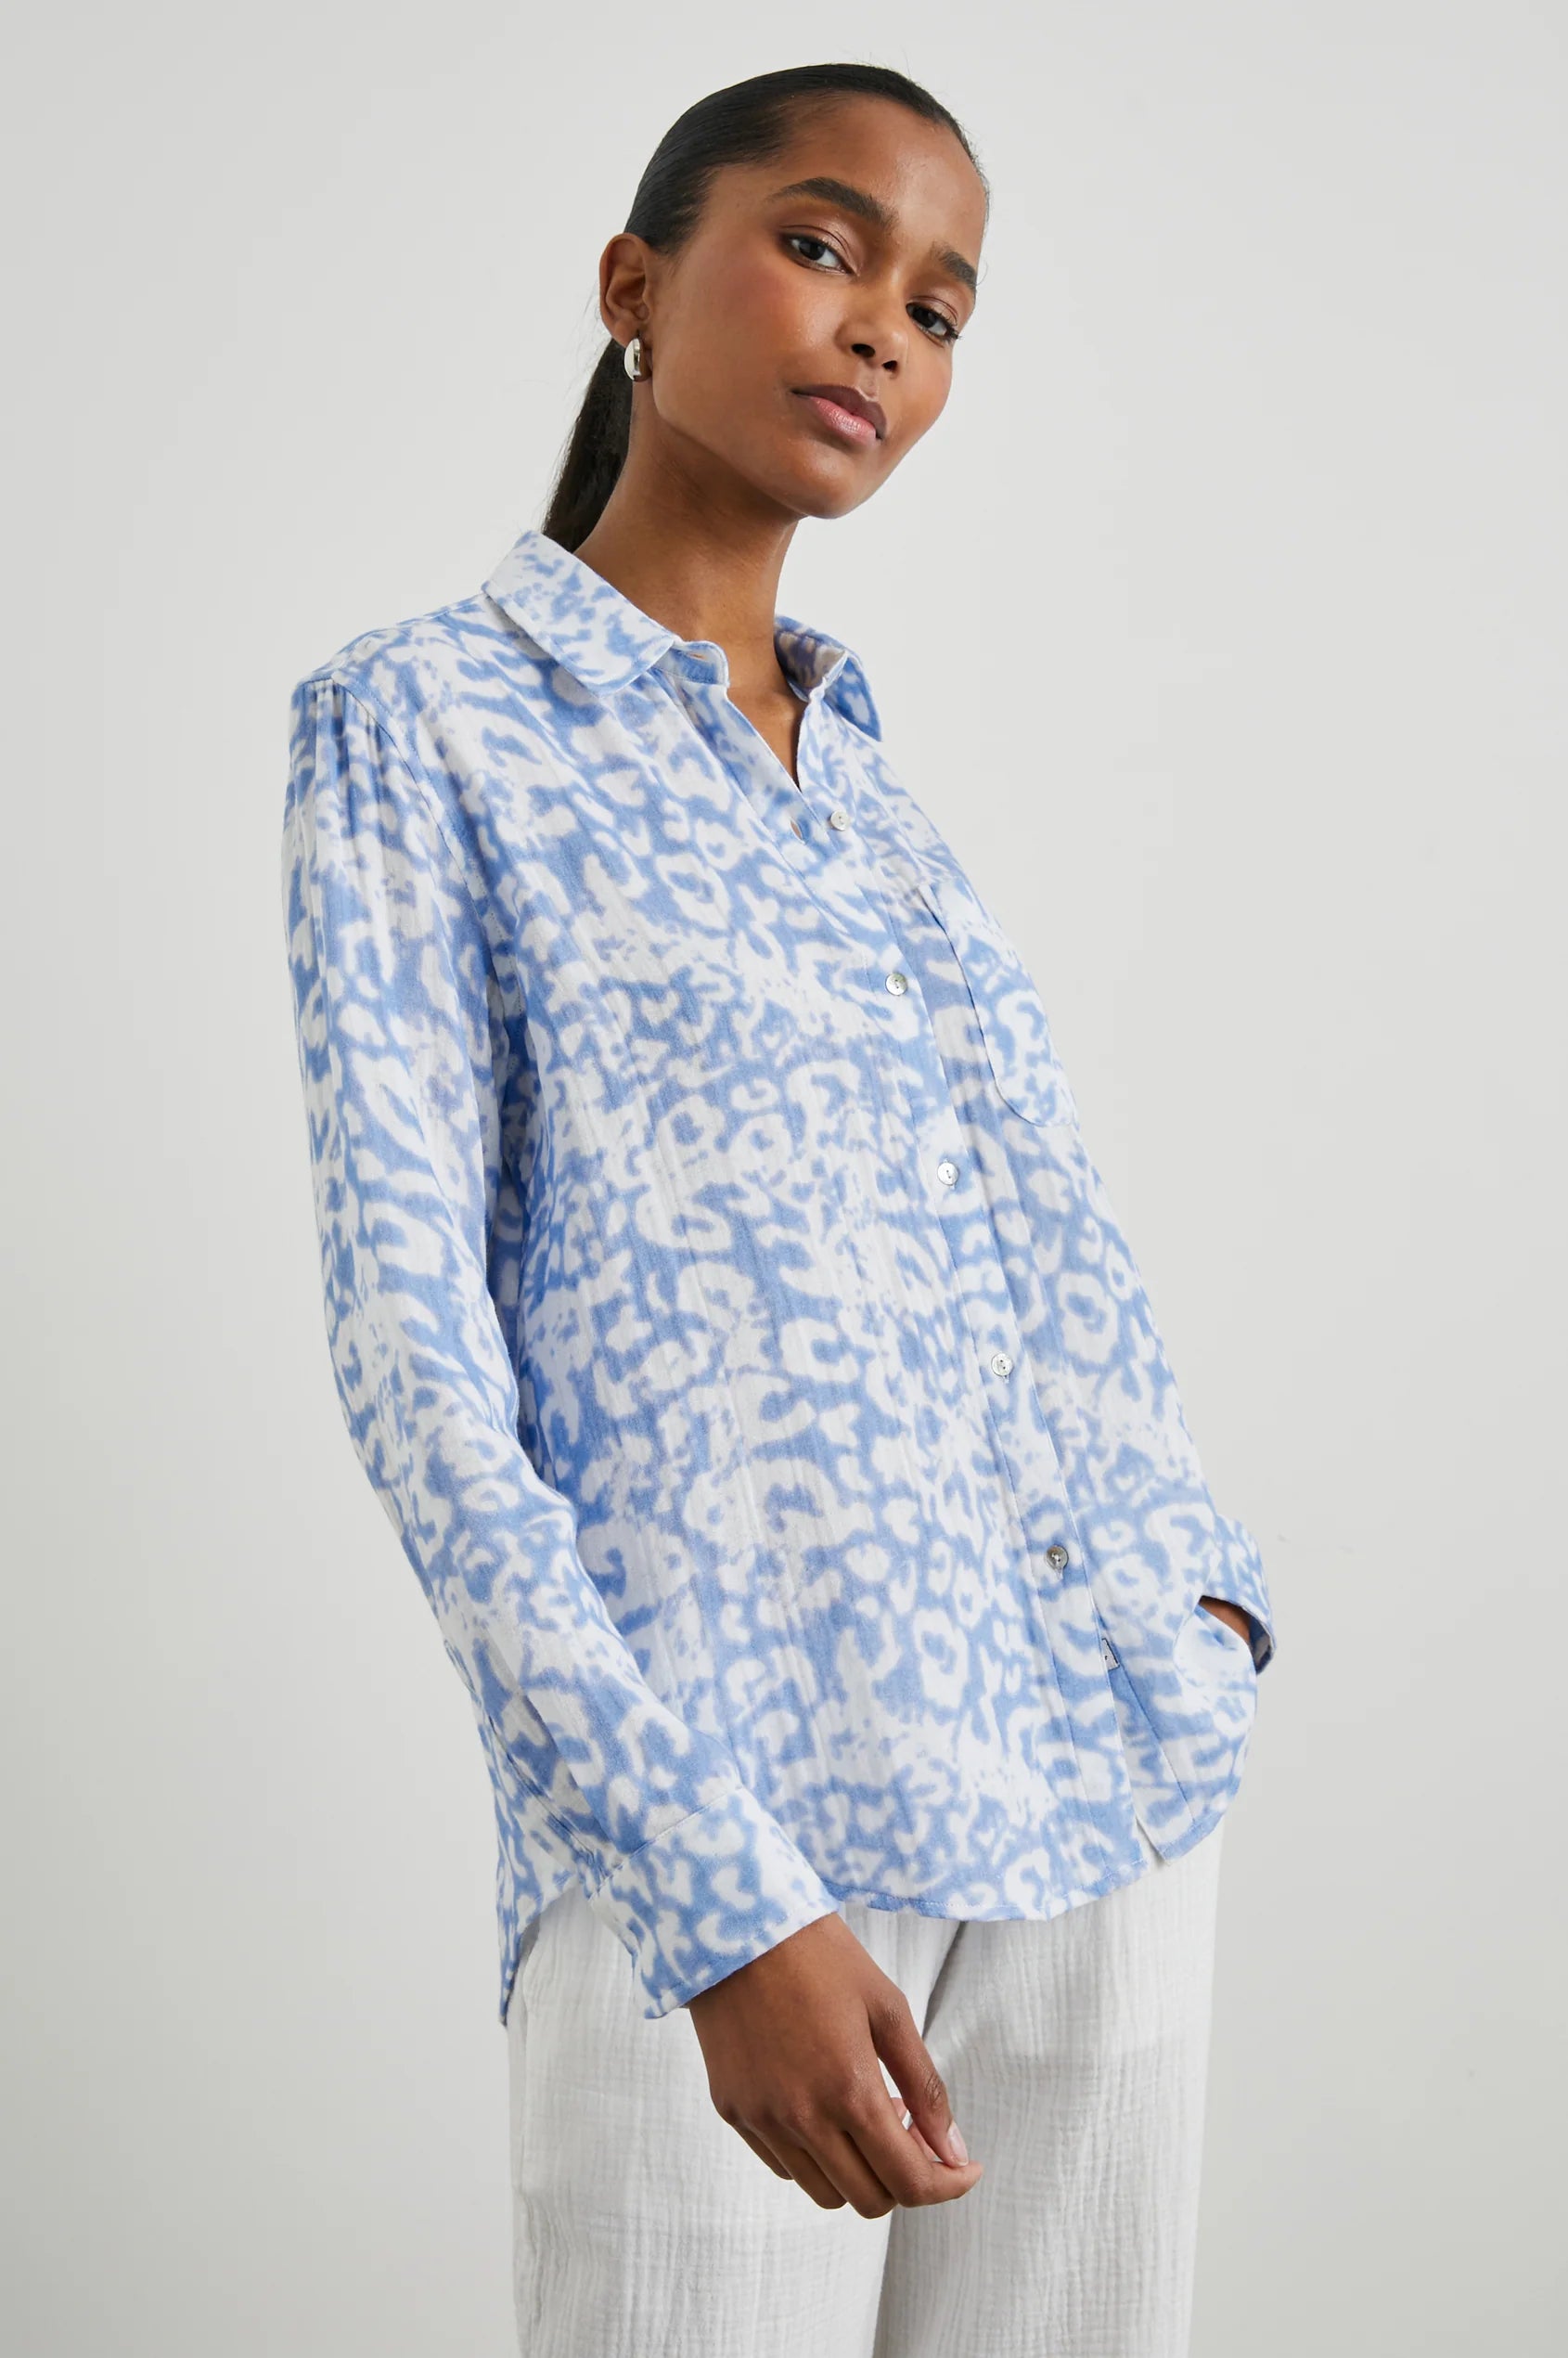 LIght blue and white cheetah print classic shirt with curved hem in a cotton gauge